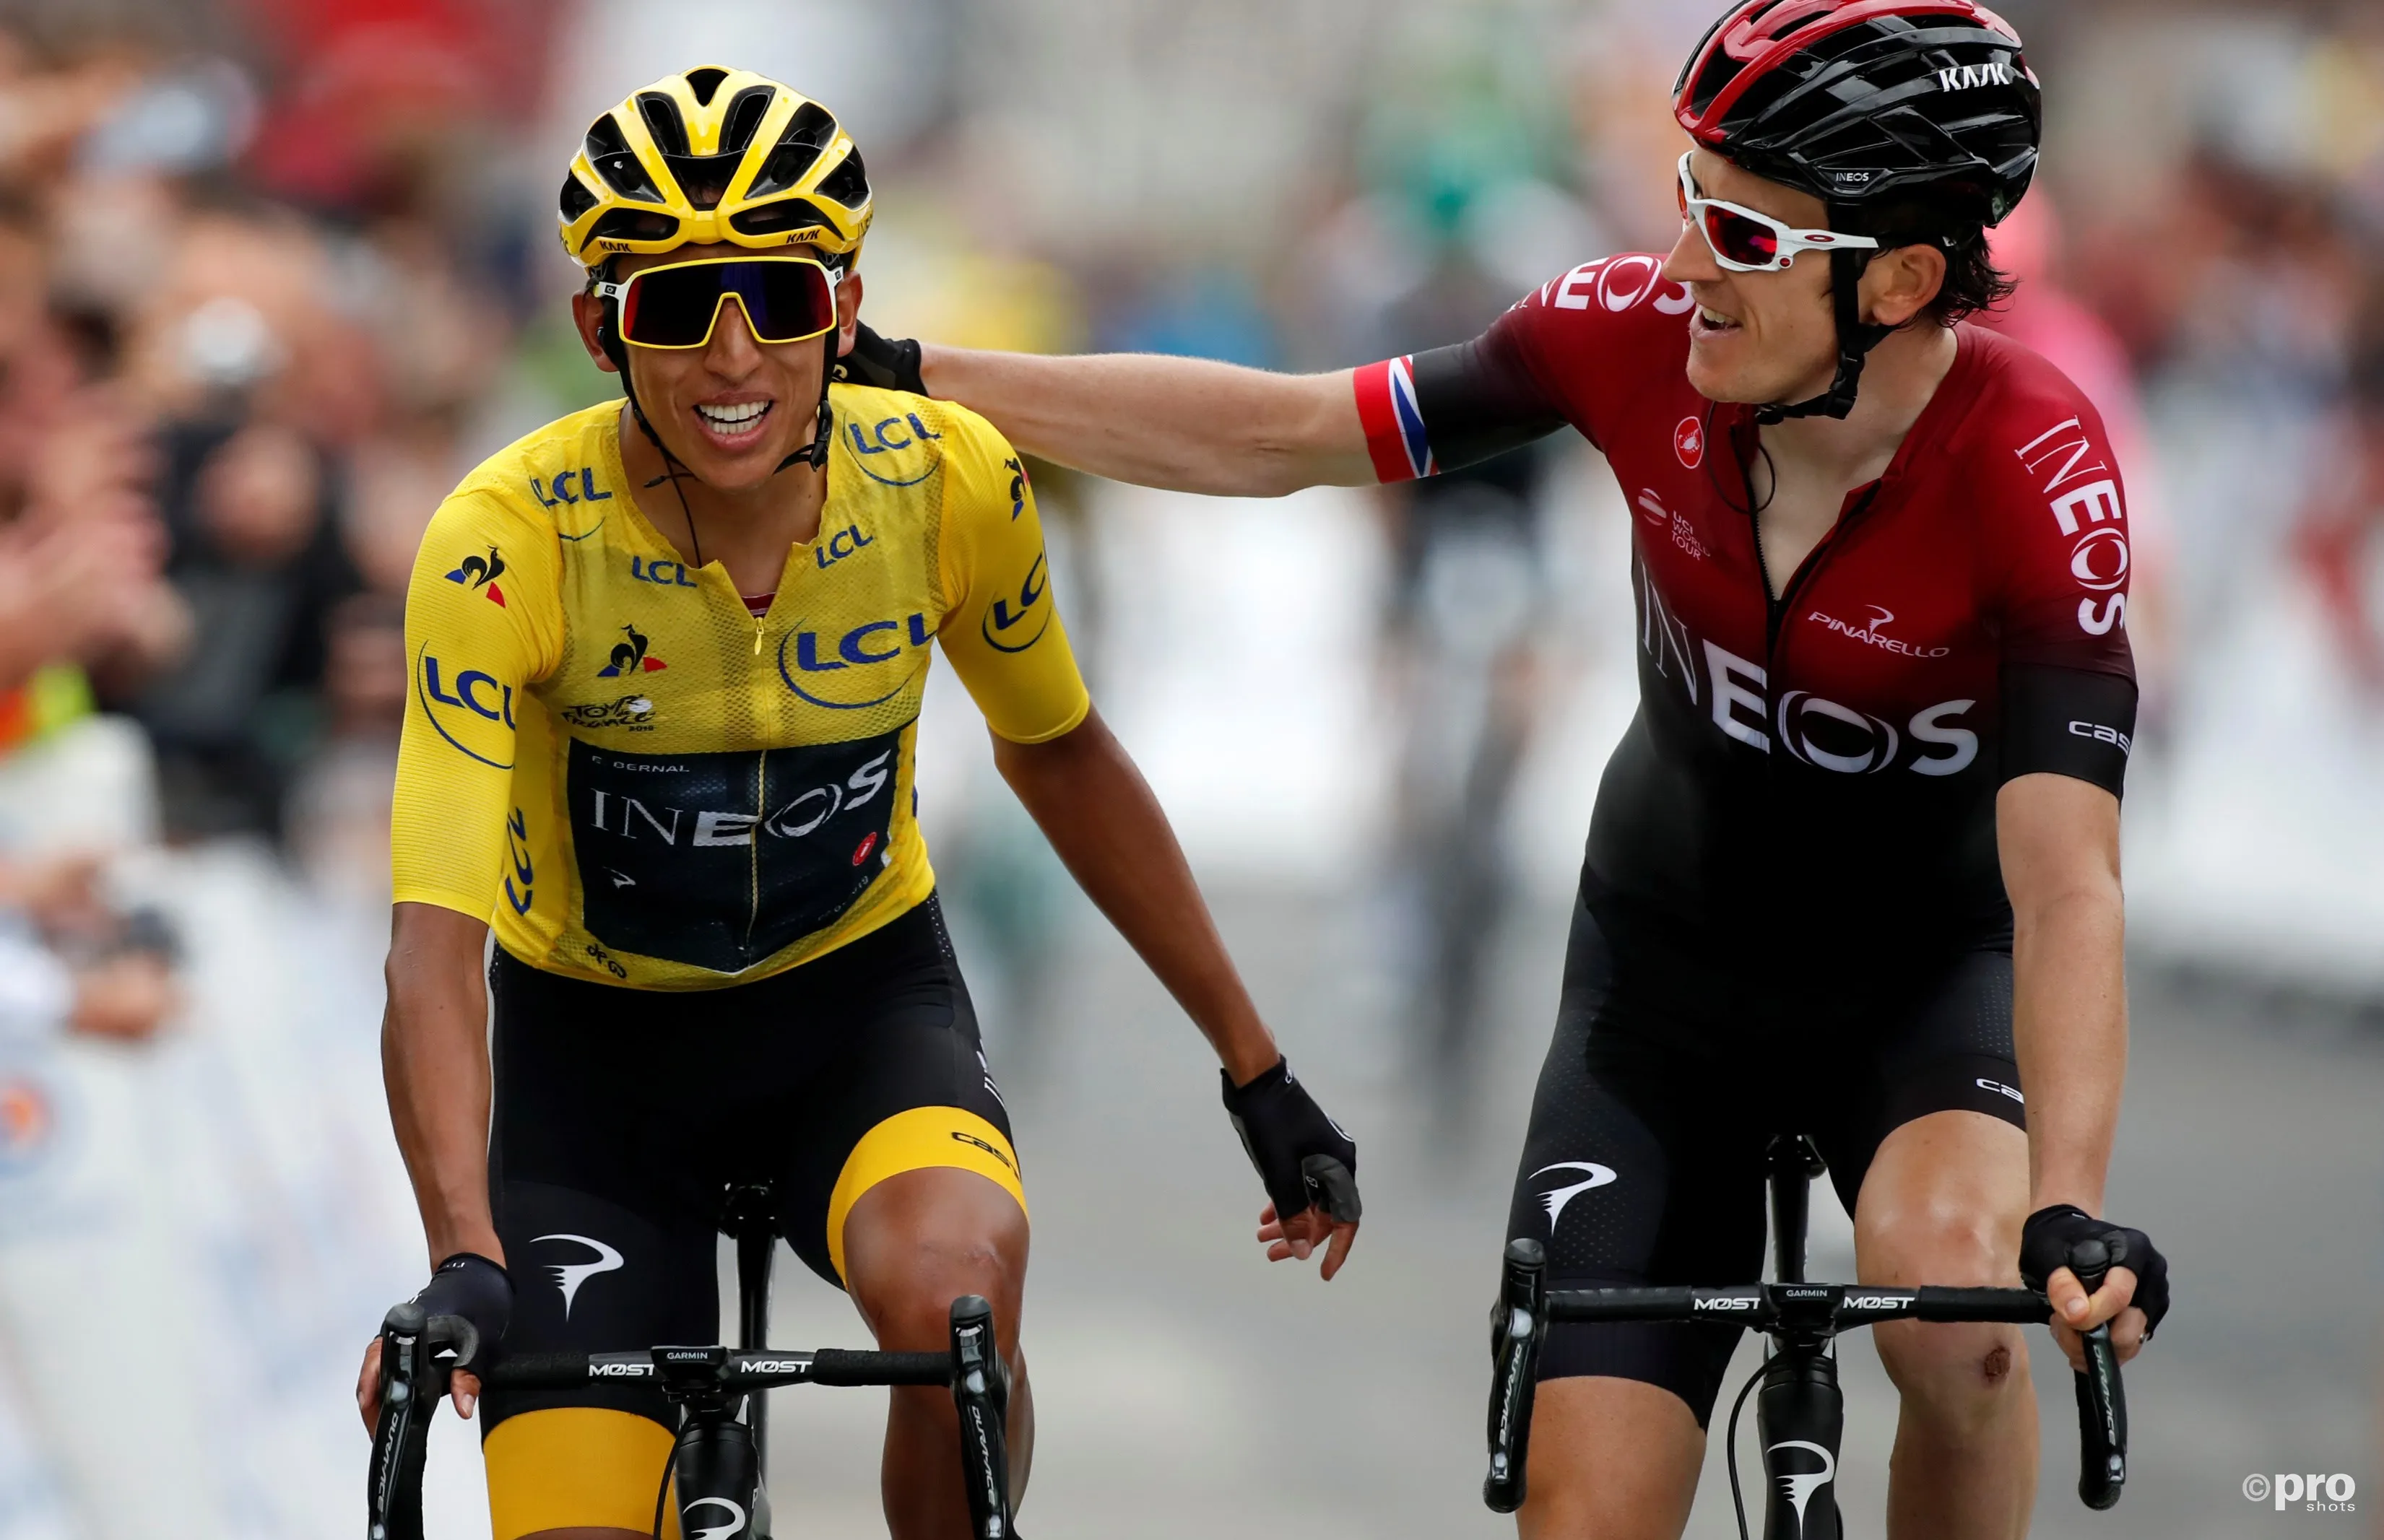 Egan Bernal is the first and only Colombian rider to have ever won the Tour de France; this happened in 2019. @Sirotti